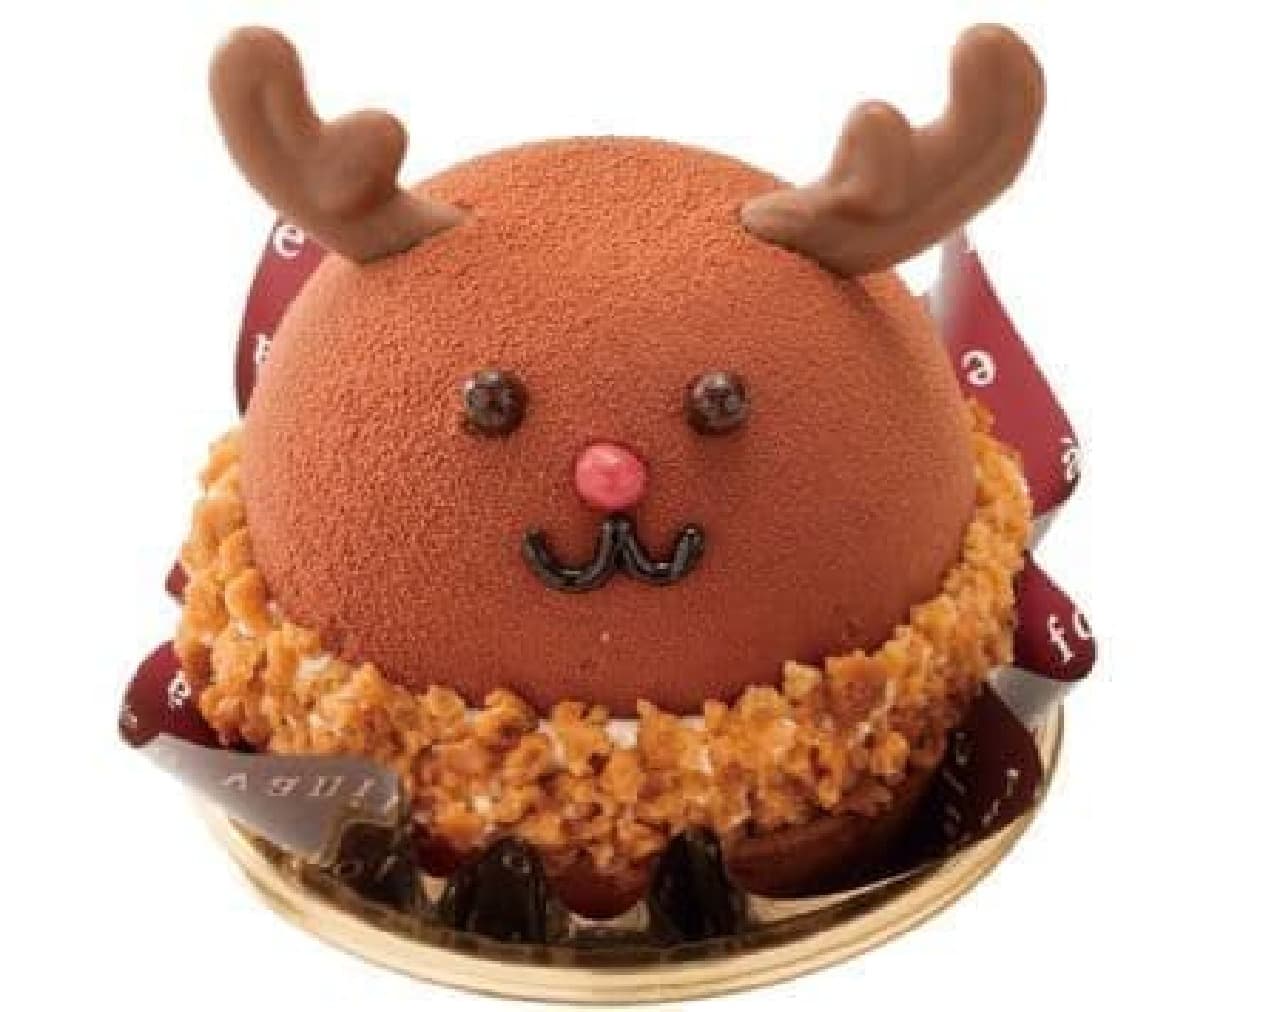 Chateraise "Xmas bright red reindeer"